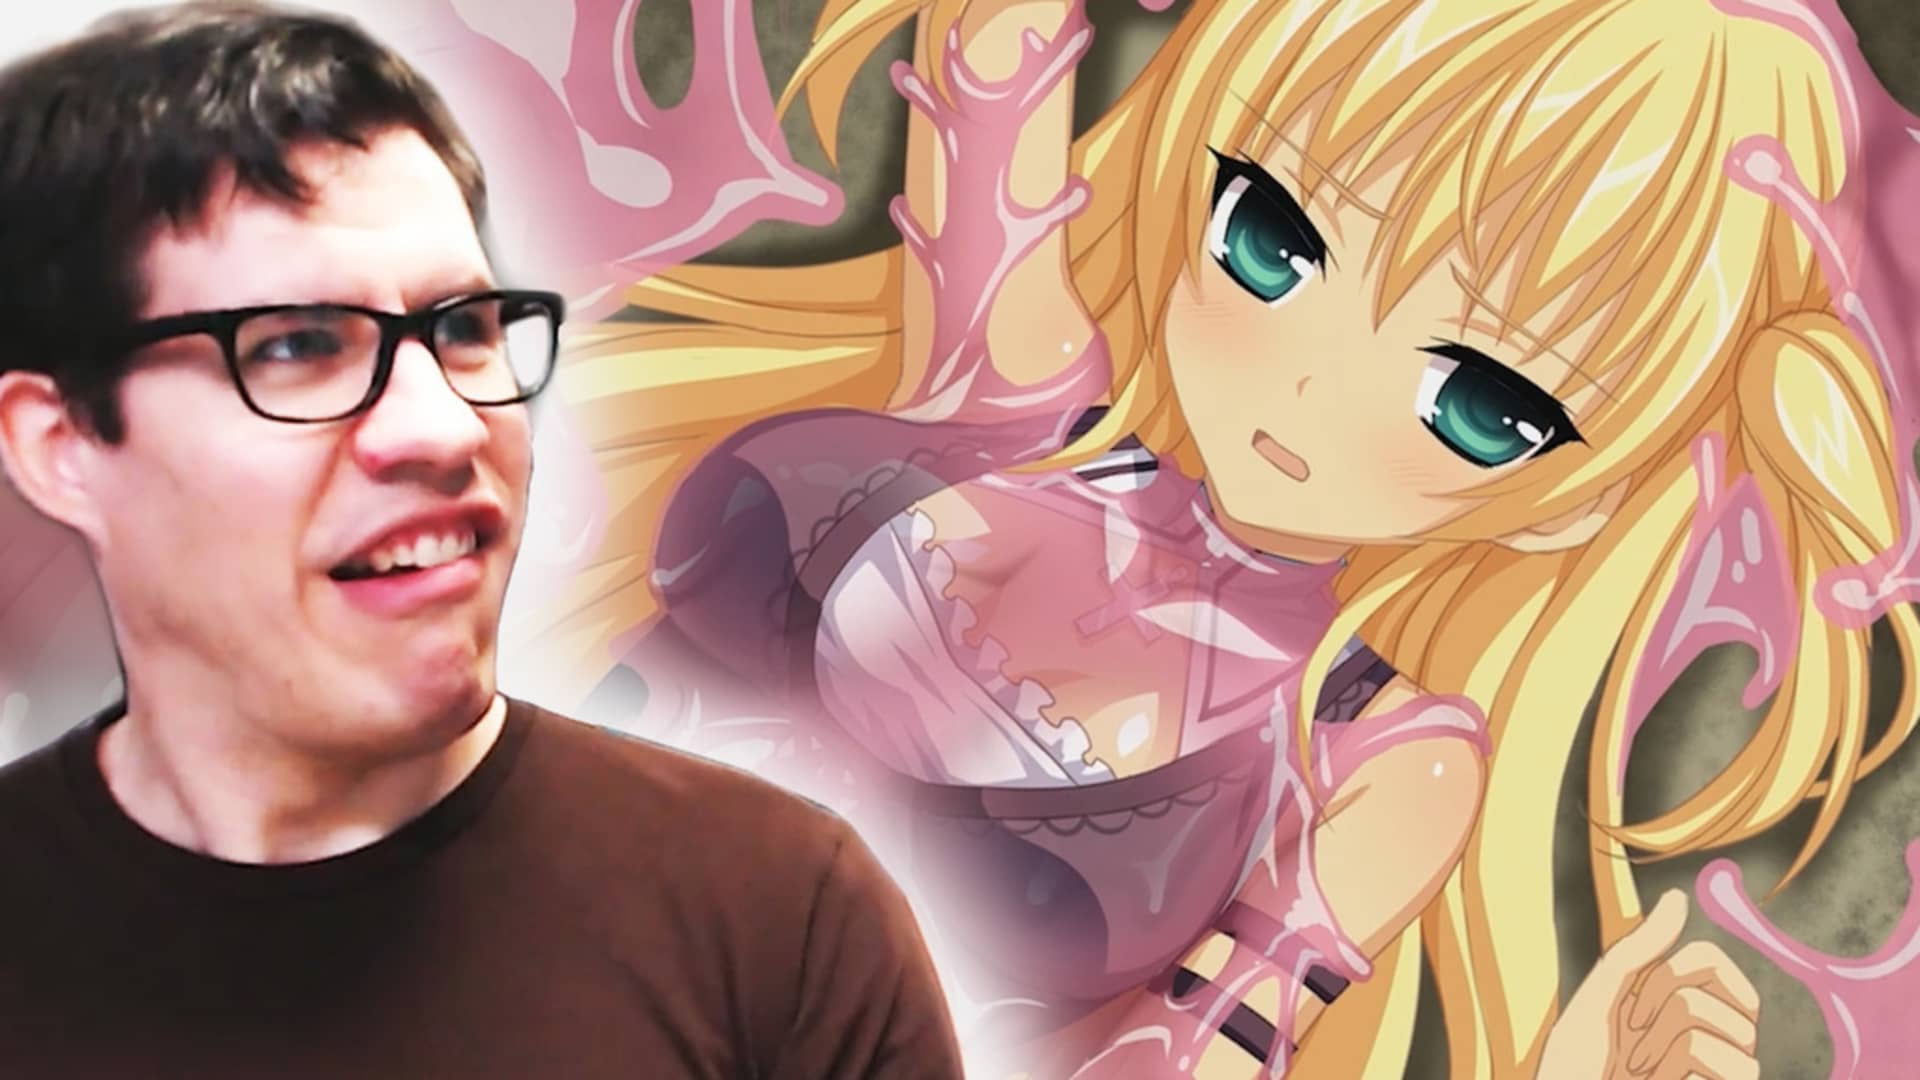 Weird Anime Murder Porn - ANIME IS GROSS - Anime Porno Games Gameplay - Rooster Teeth